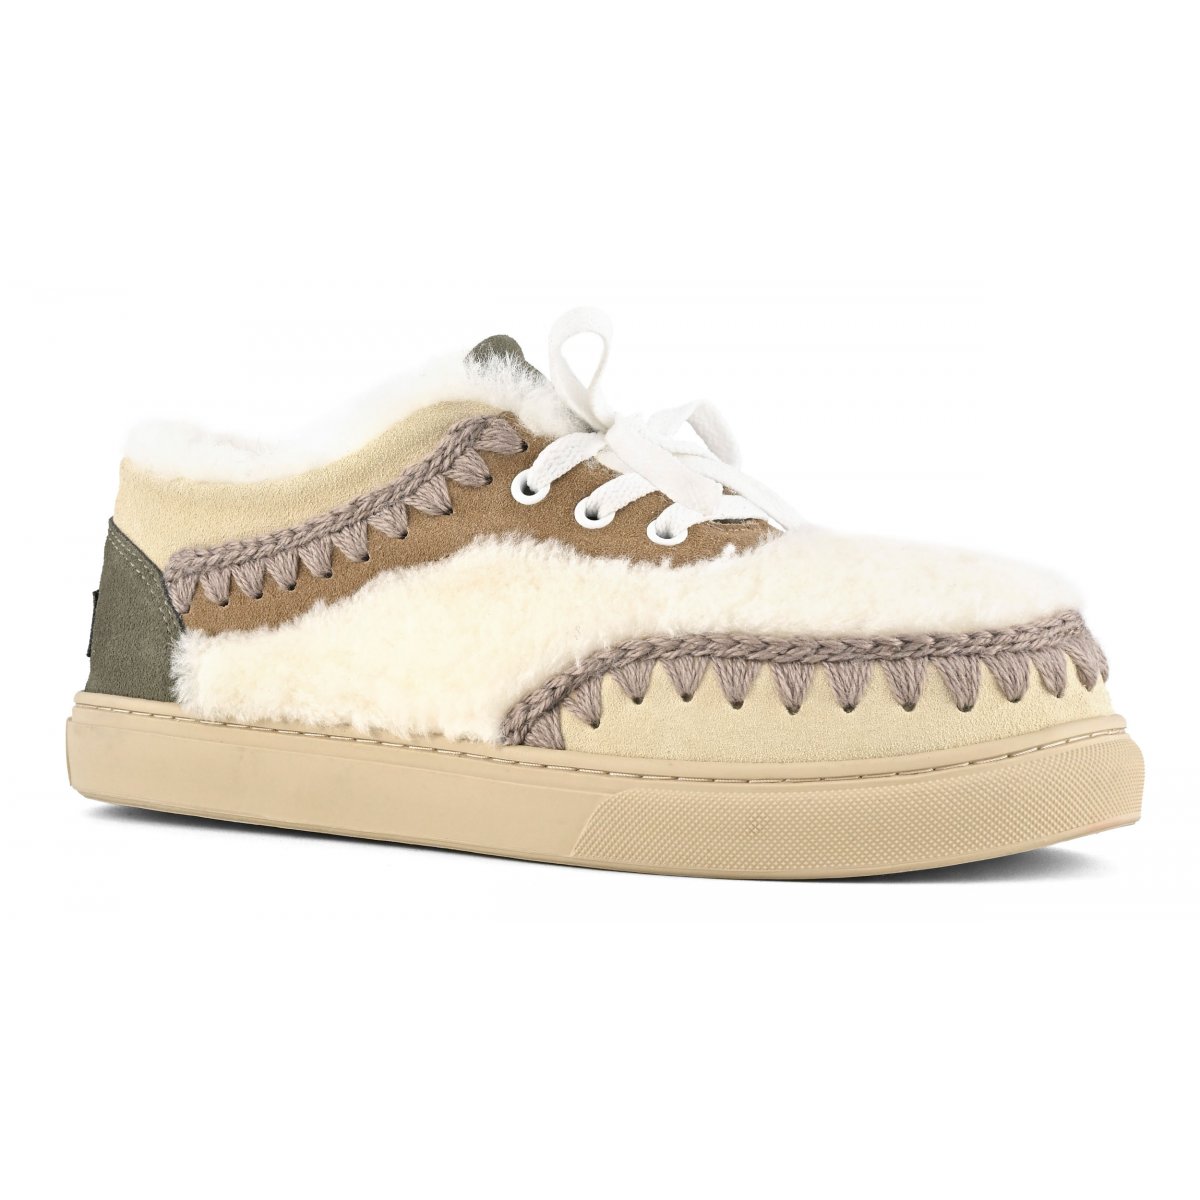 Unisex lace-up sneaker shearling DKST img 2